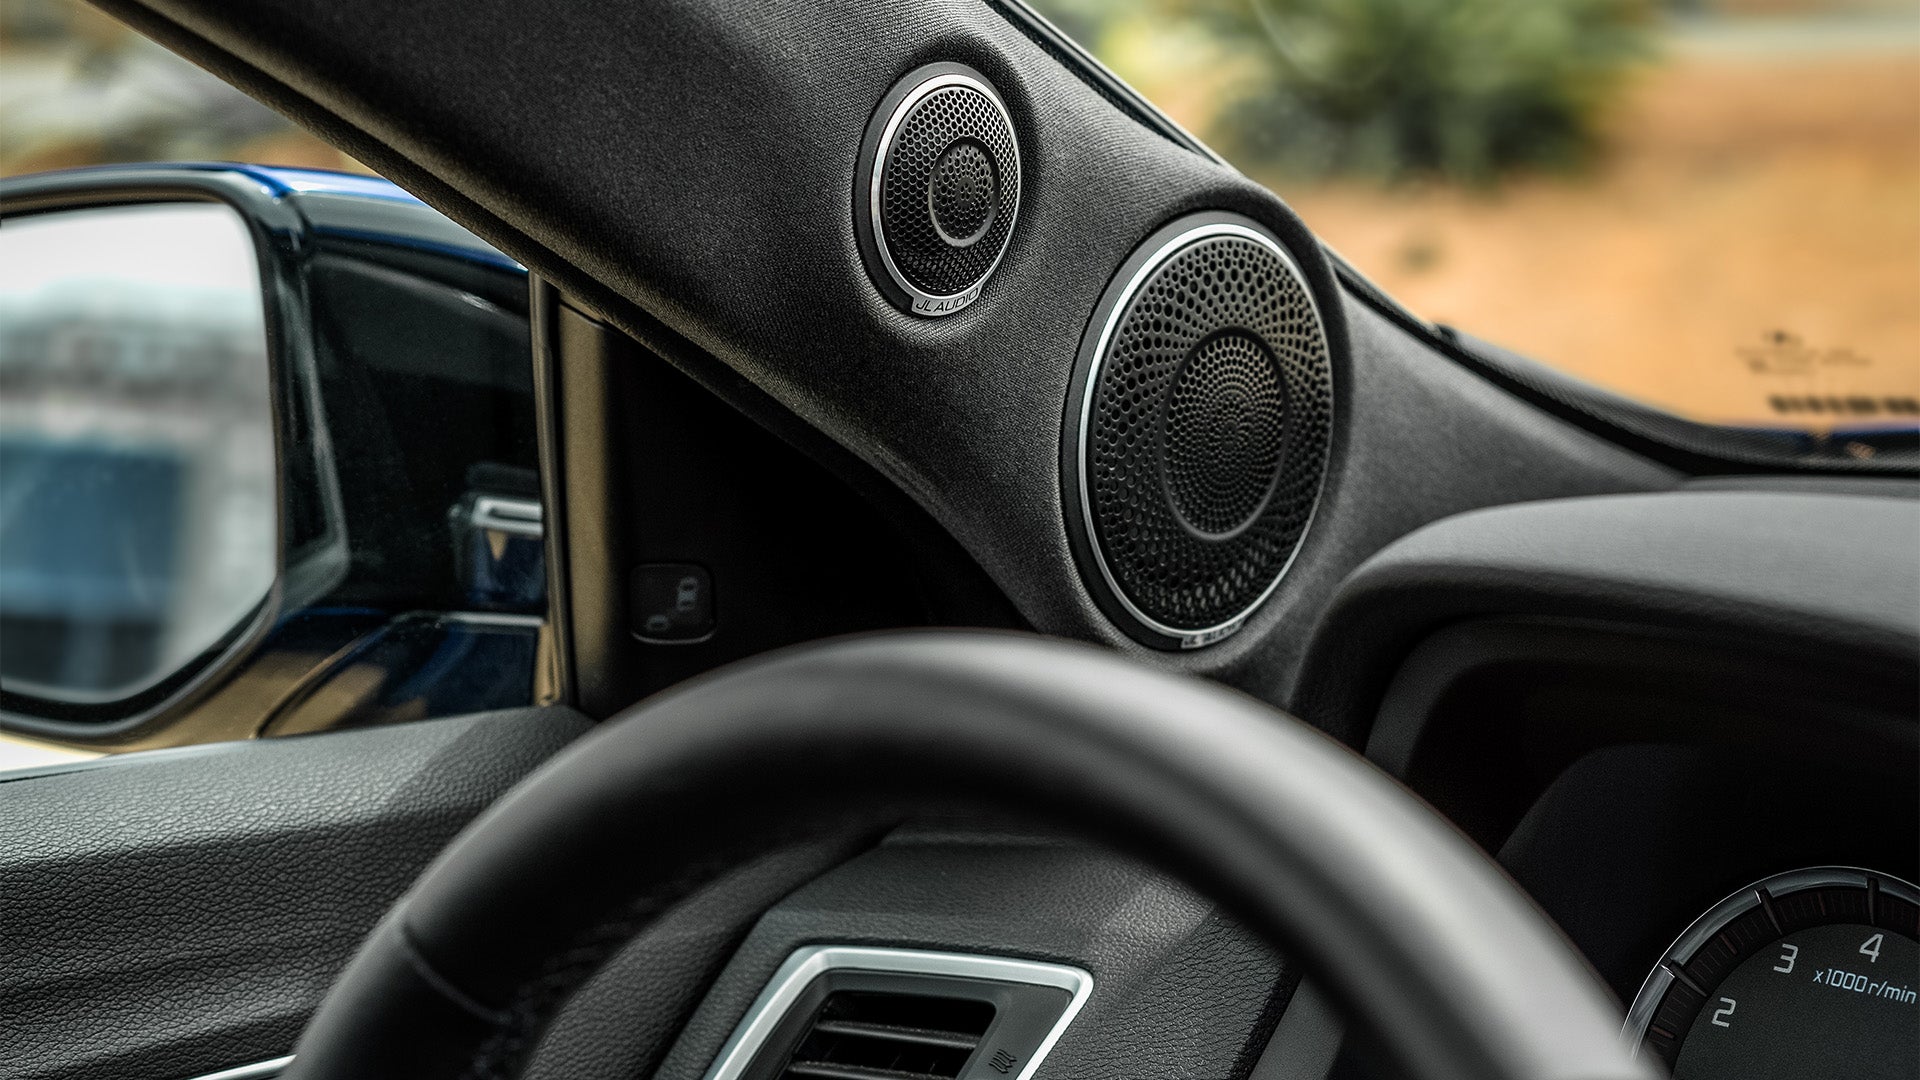 A pair of C7 car audio speakers in an Acura TLX.